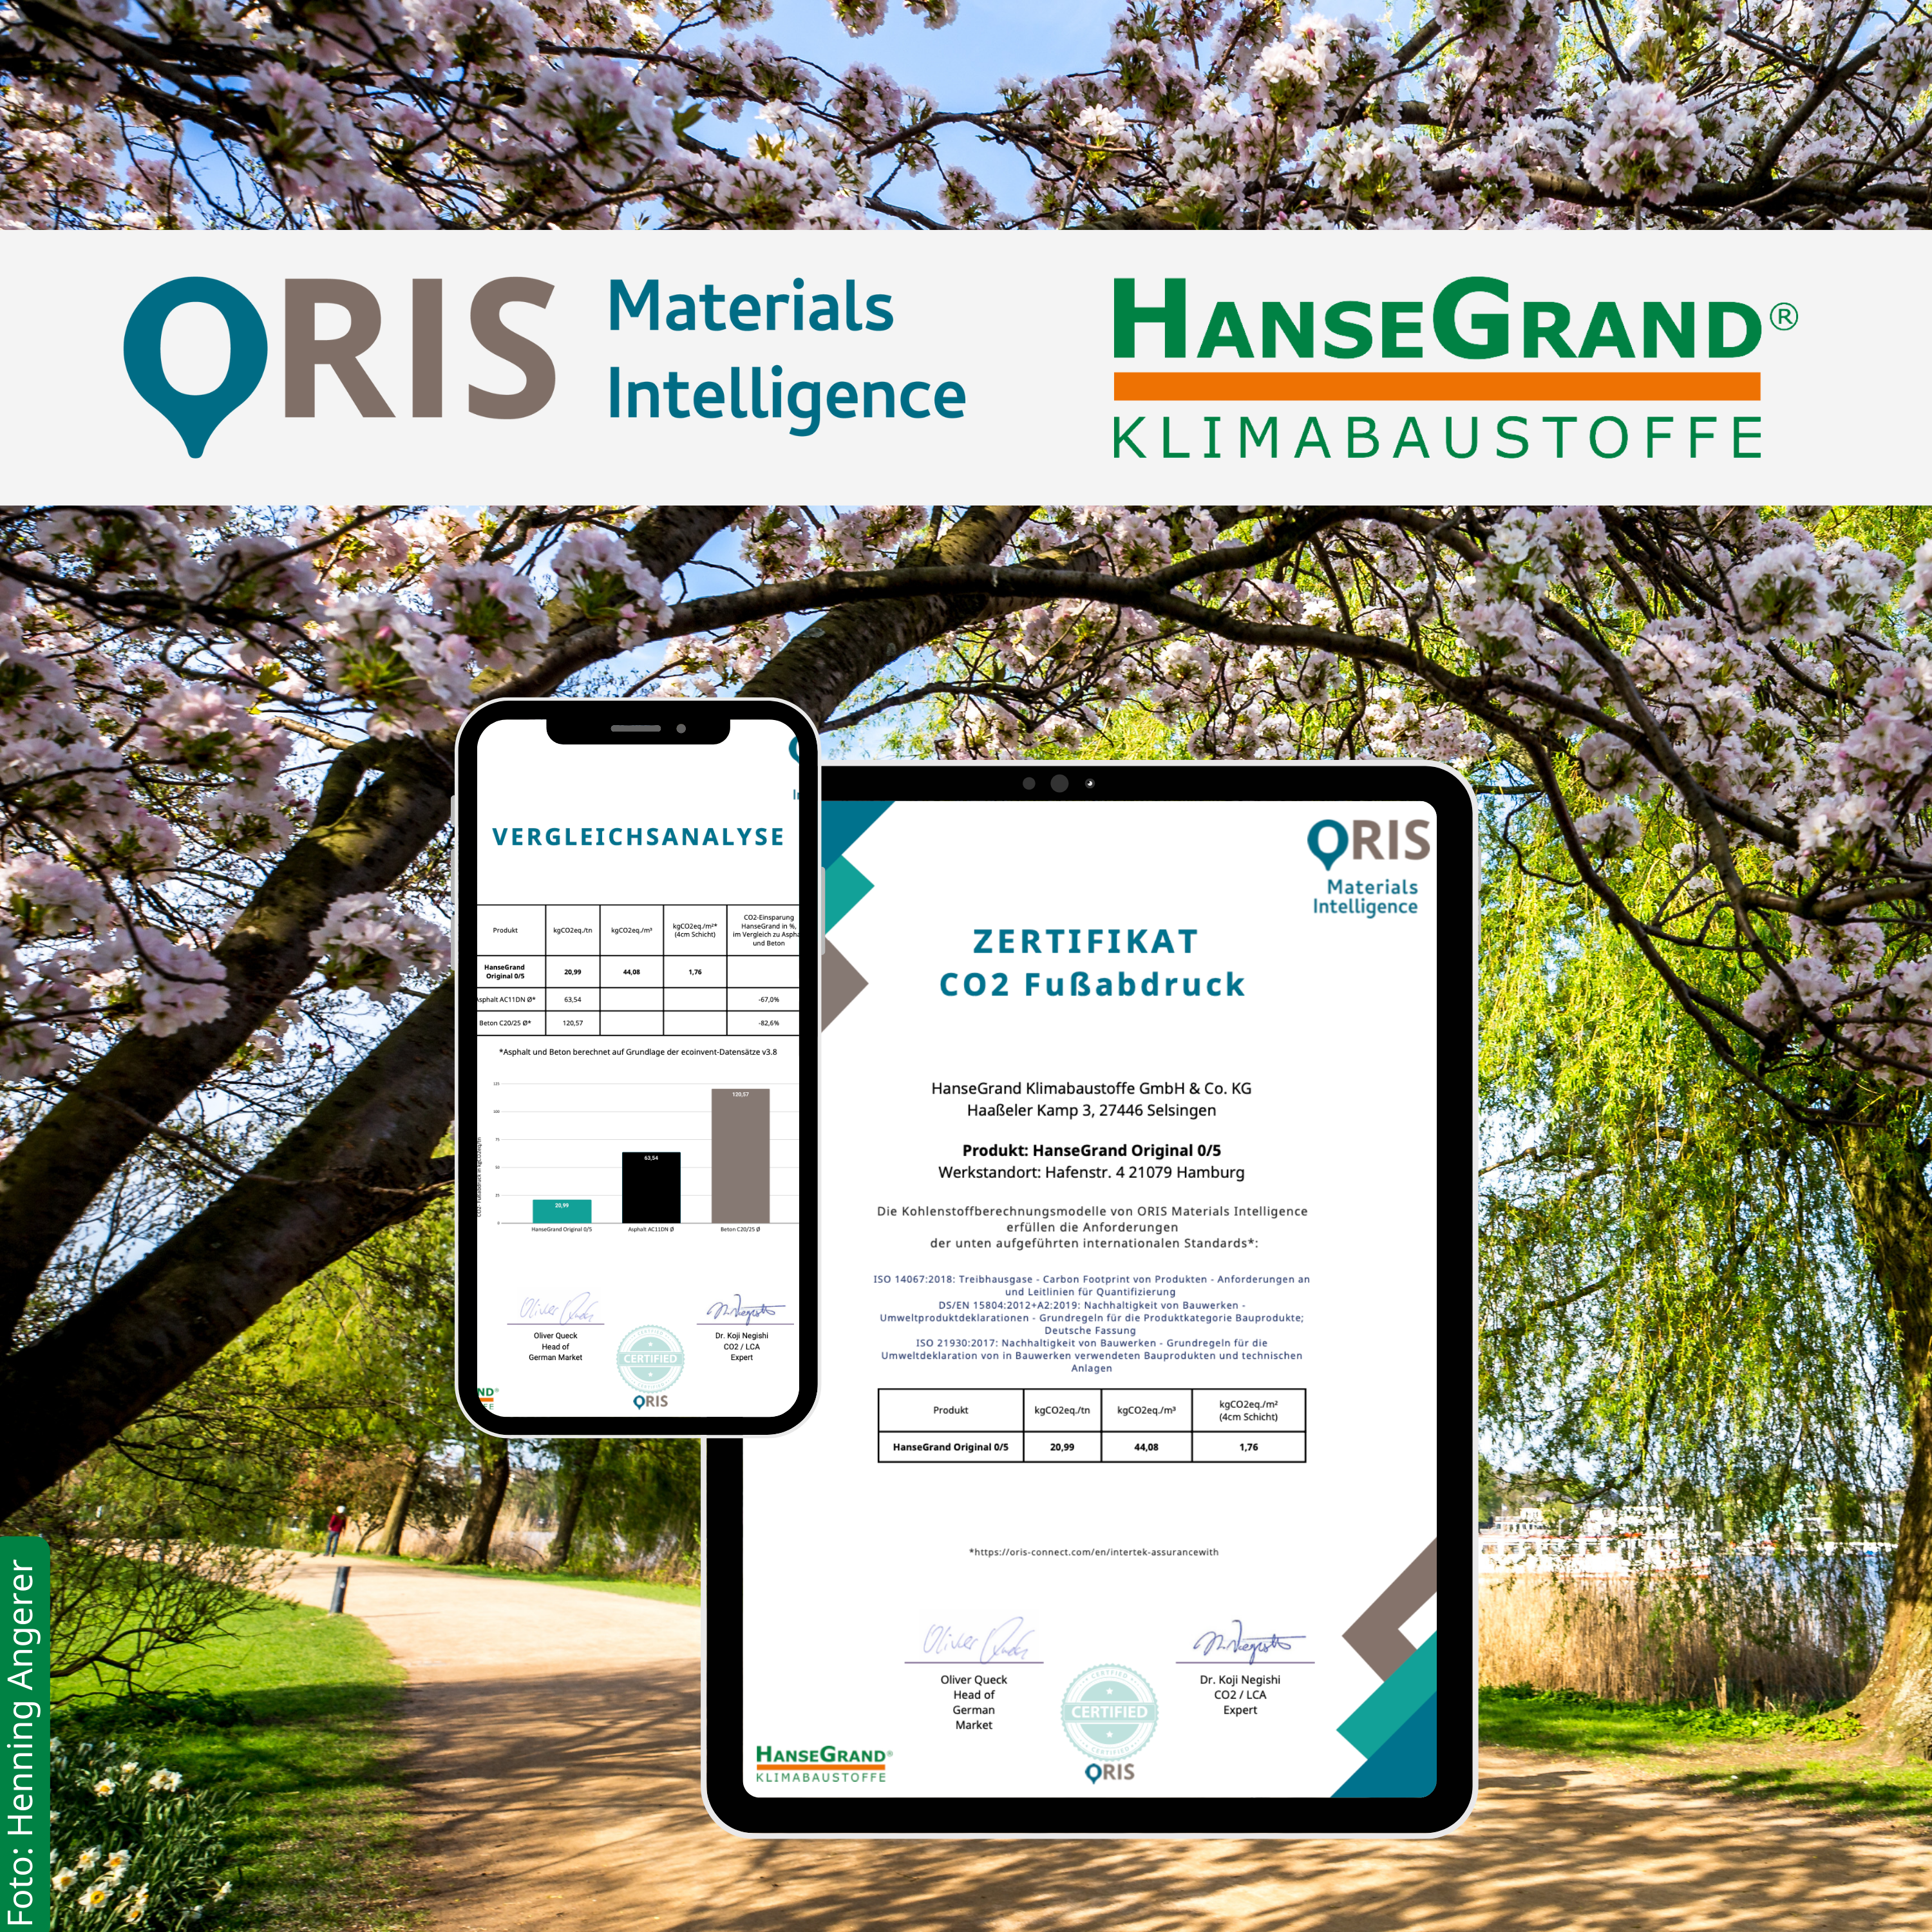 Path surfaces from HanseGrand: easy-care, weather-resistant, durable and now also CO2-certified by ORIS Materials Intelligence!